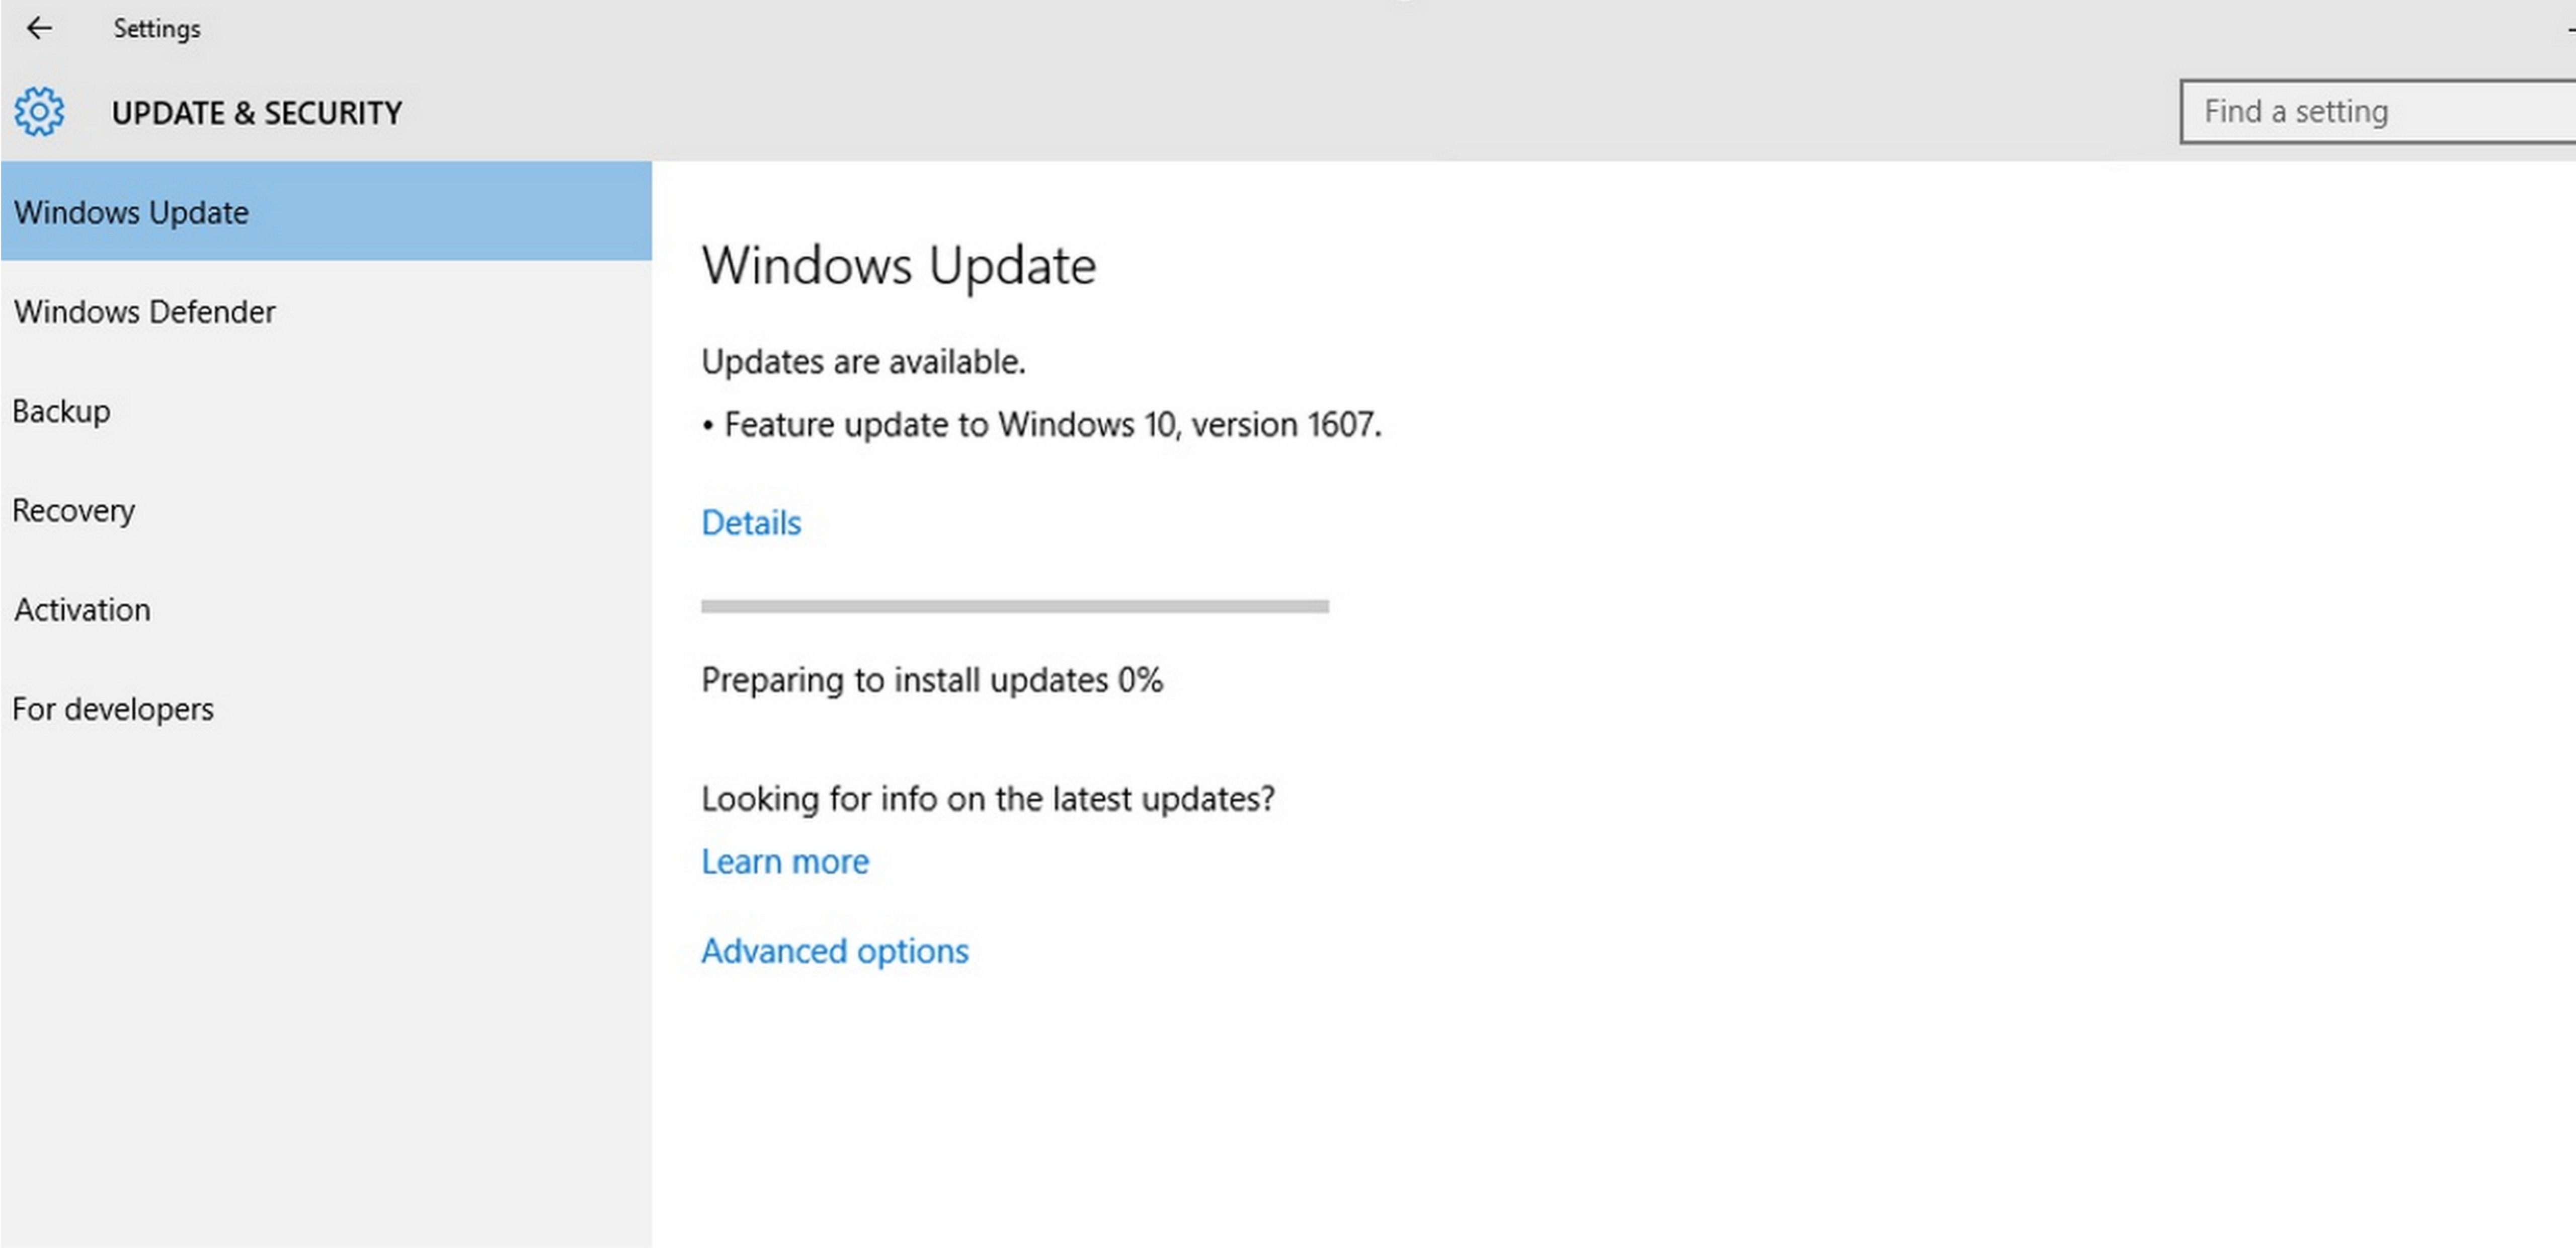 Open Settings and navigate to Update & Security
Select Windows Update and click Check for updates